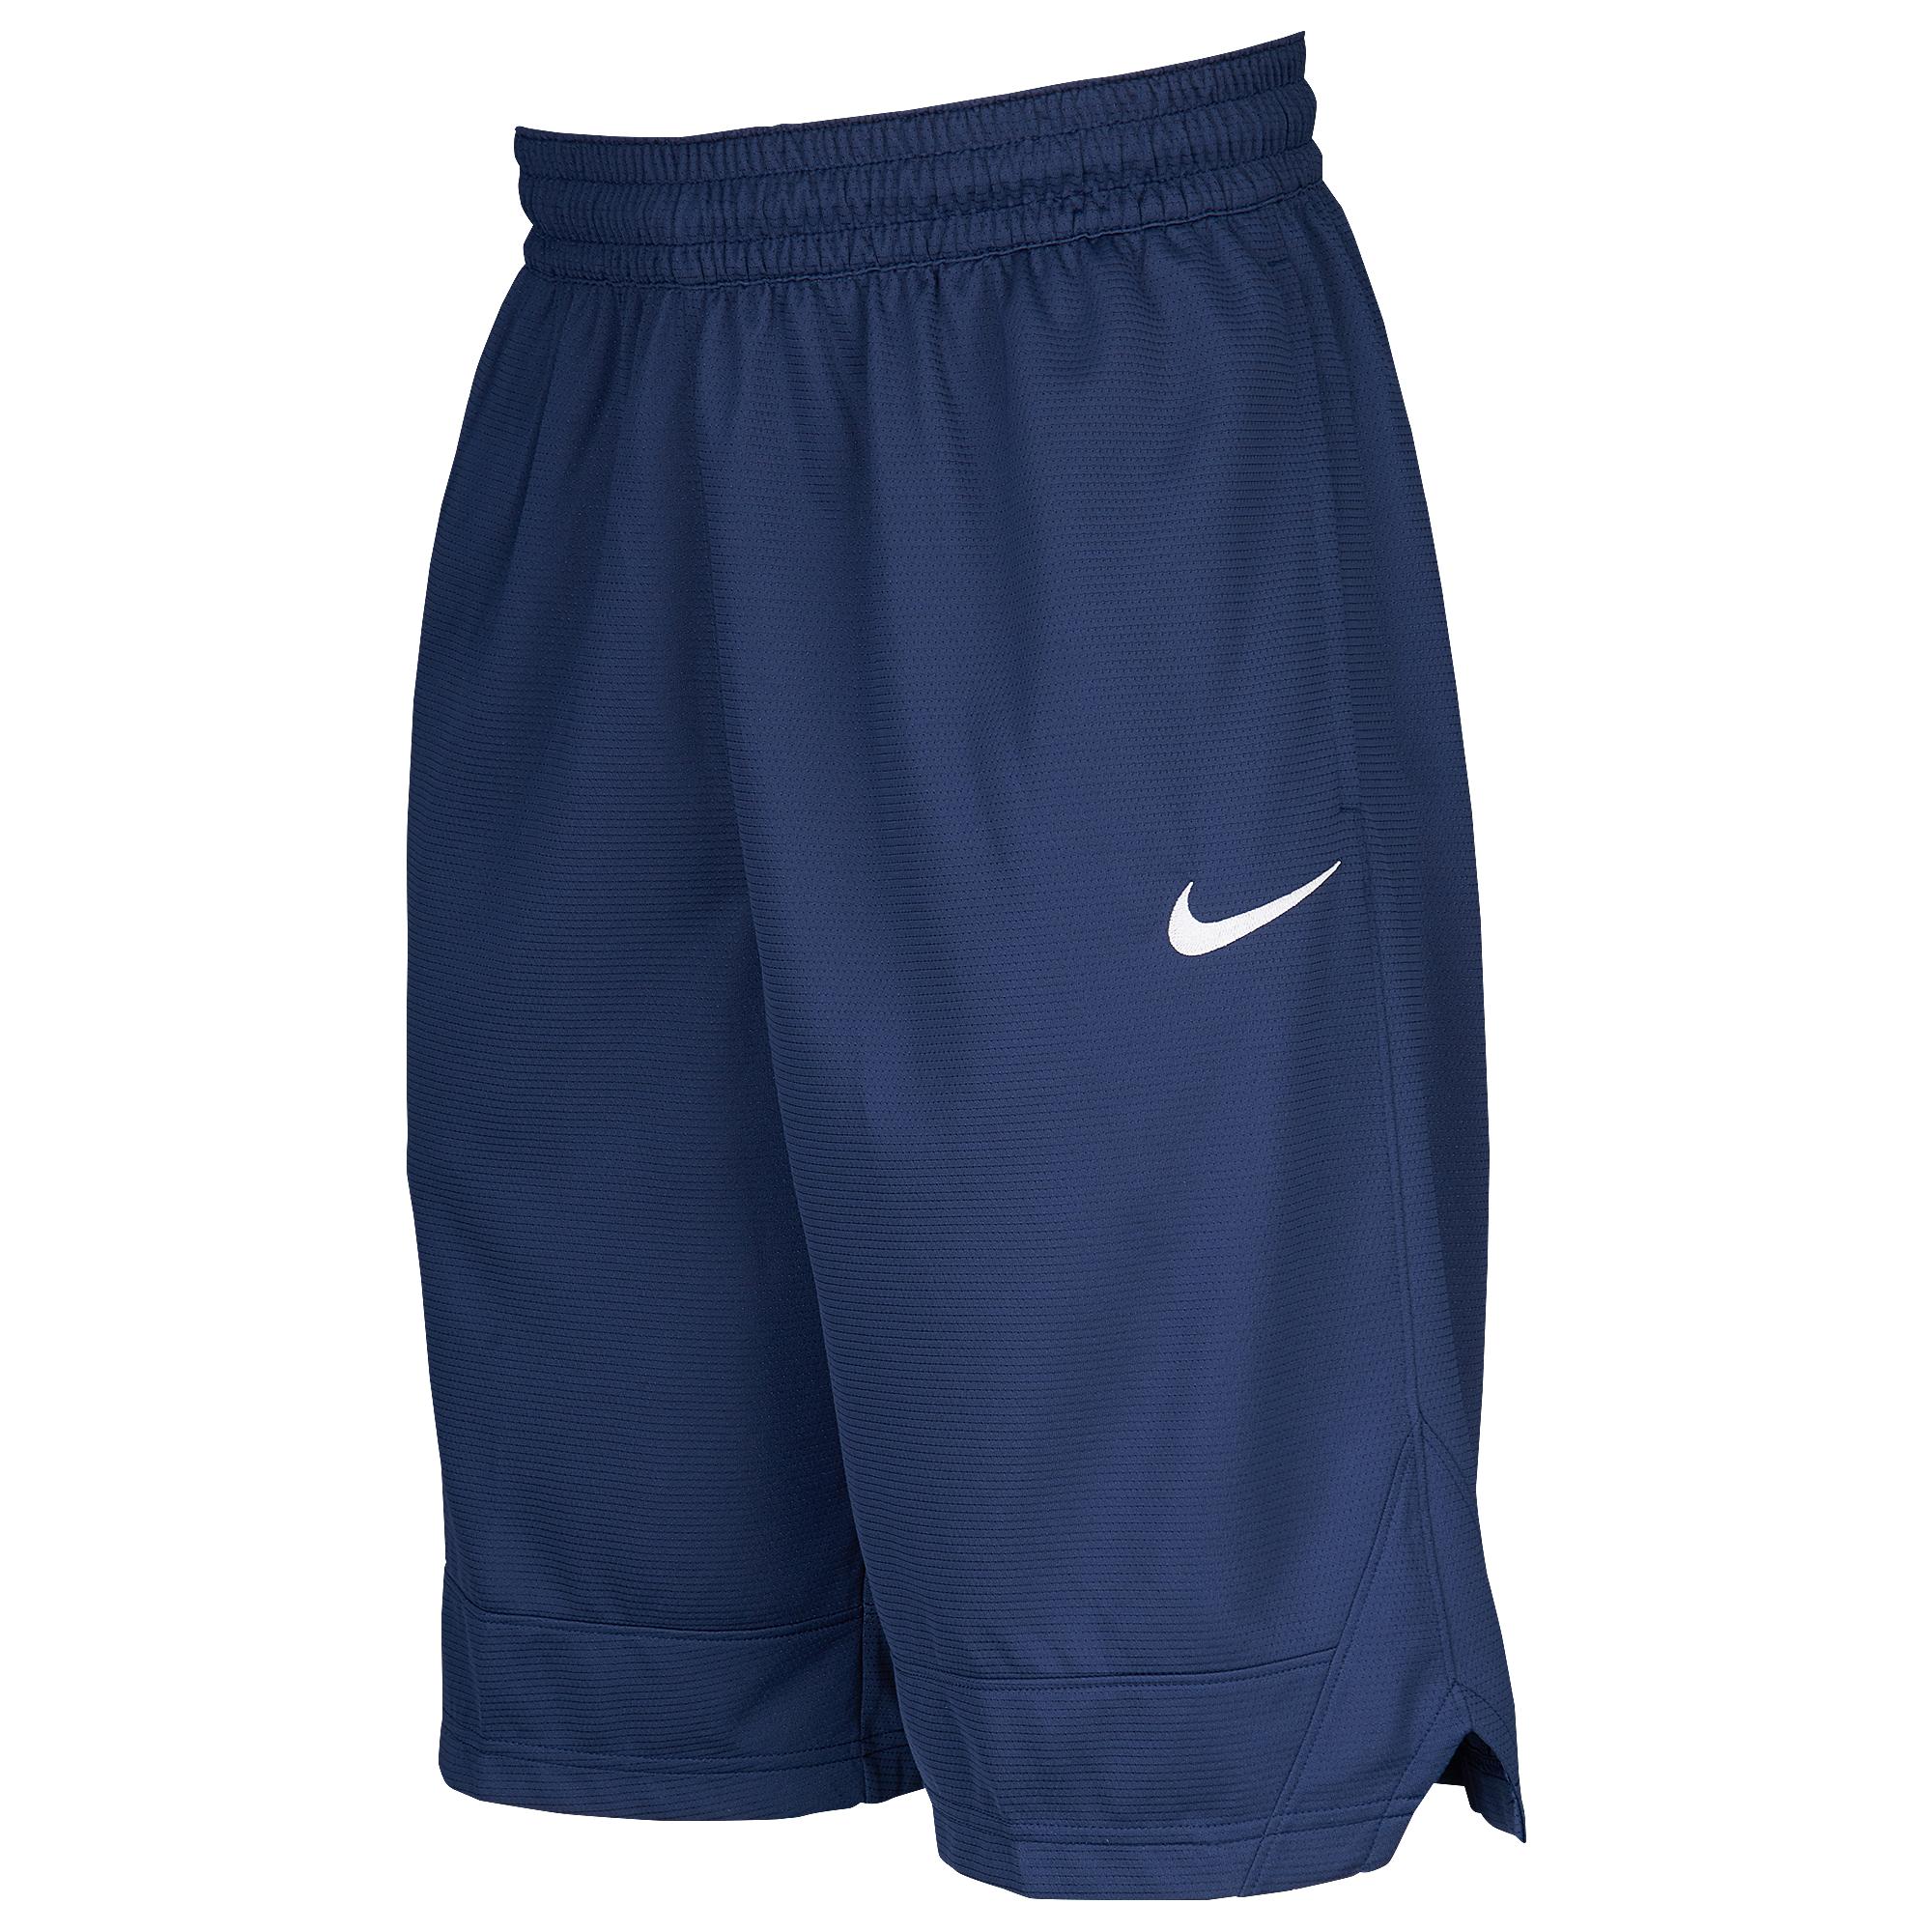 Nike Icon Shorts in Blue for Men - Lyst